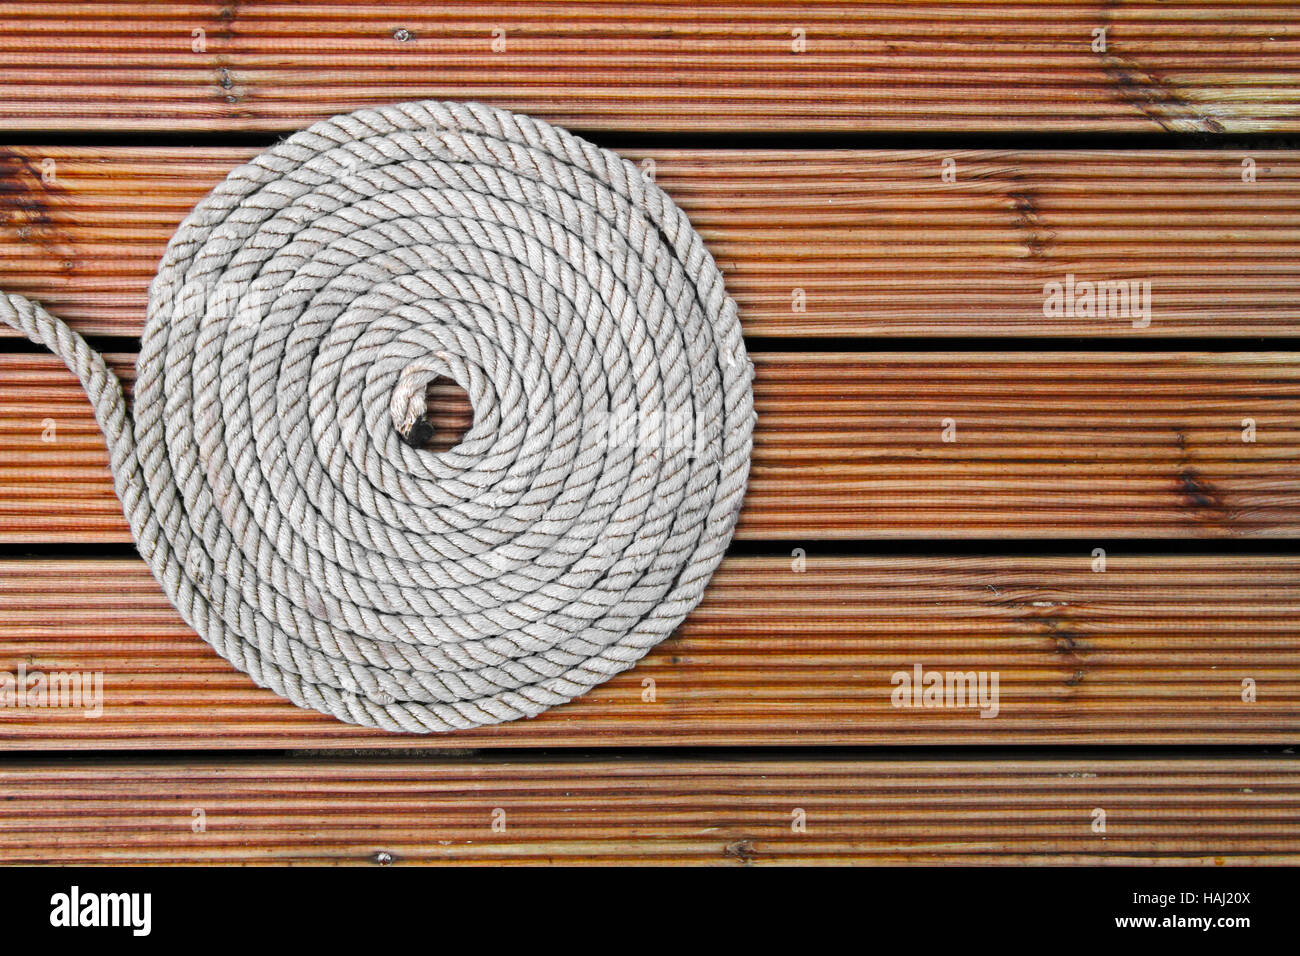 rope on wooden yacht deck Stock Photo